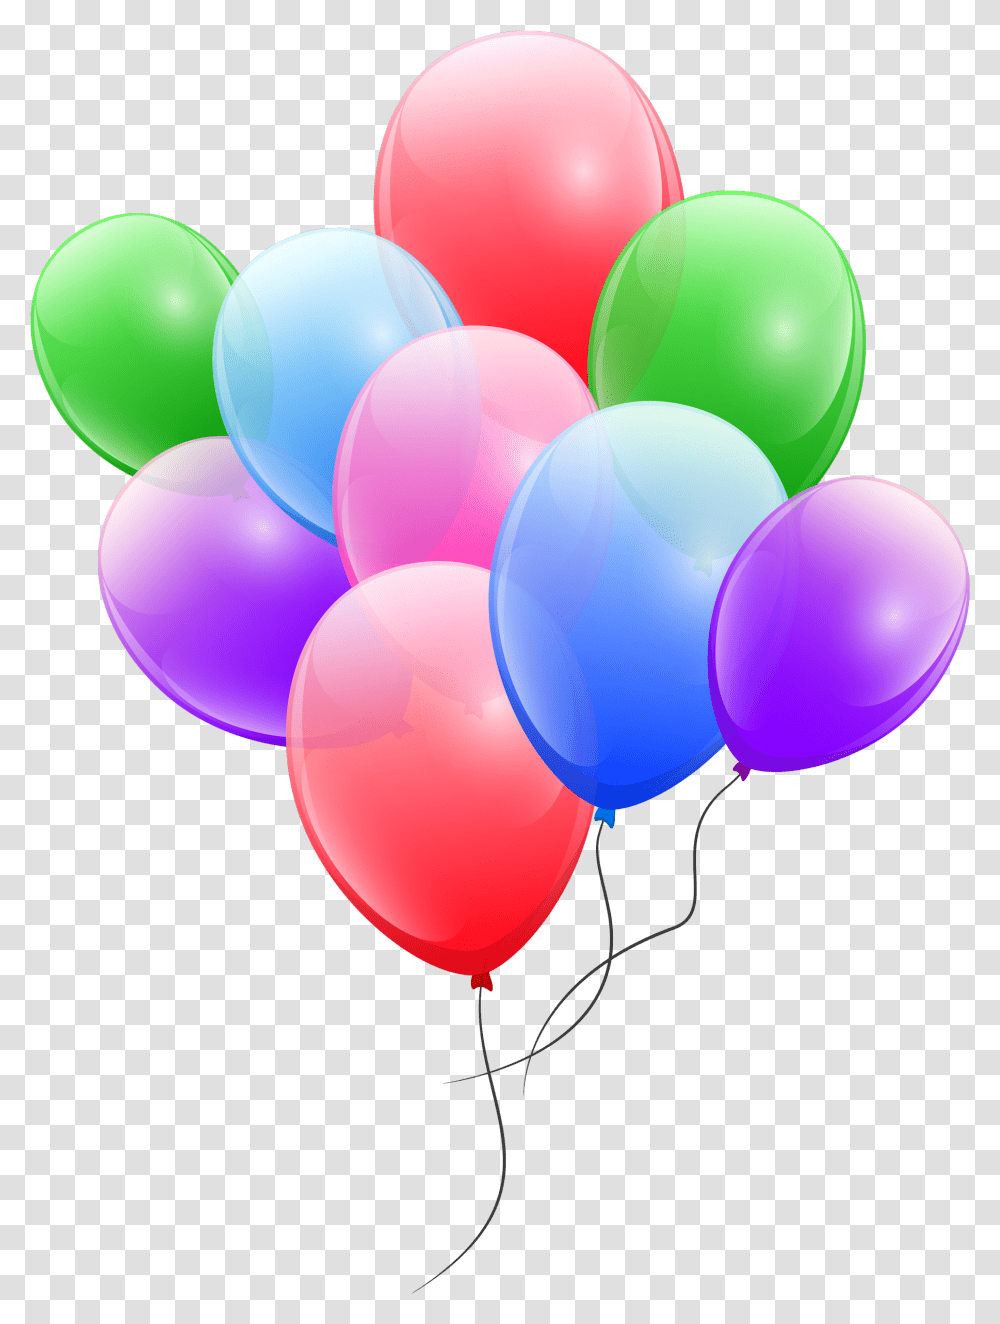 Colorful Balloons Image Colorful Balloon, Sphere Transparent Png